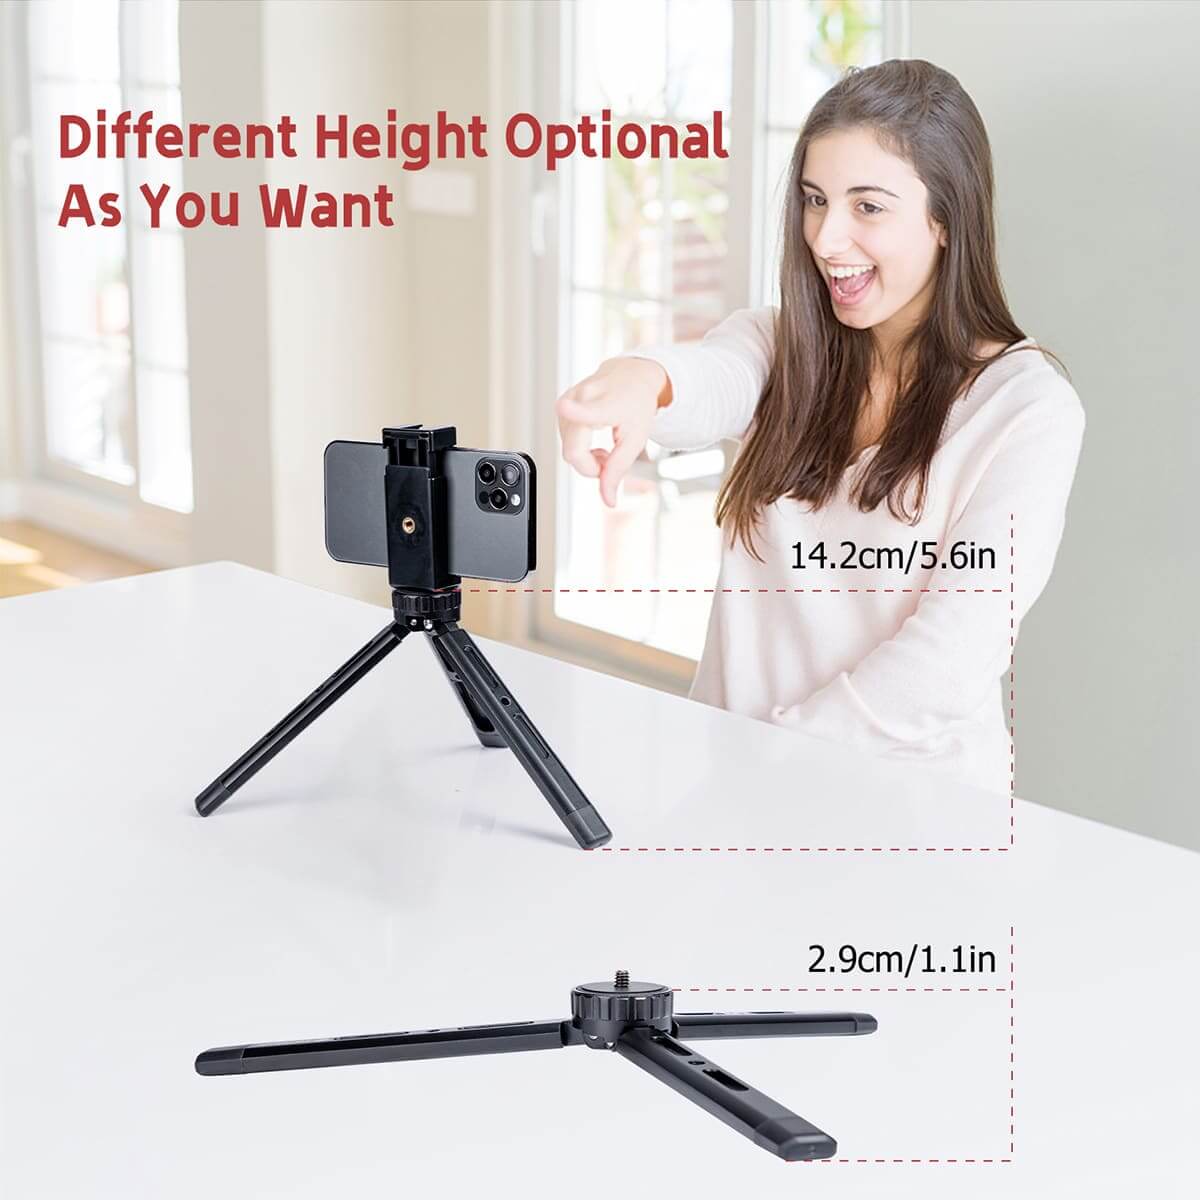 Moman TR01S mini tripod for phone and camera can adjust to different height (14.2cm to 2.9cm) for your specific needs.